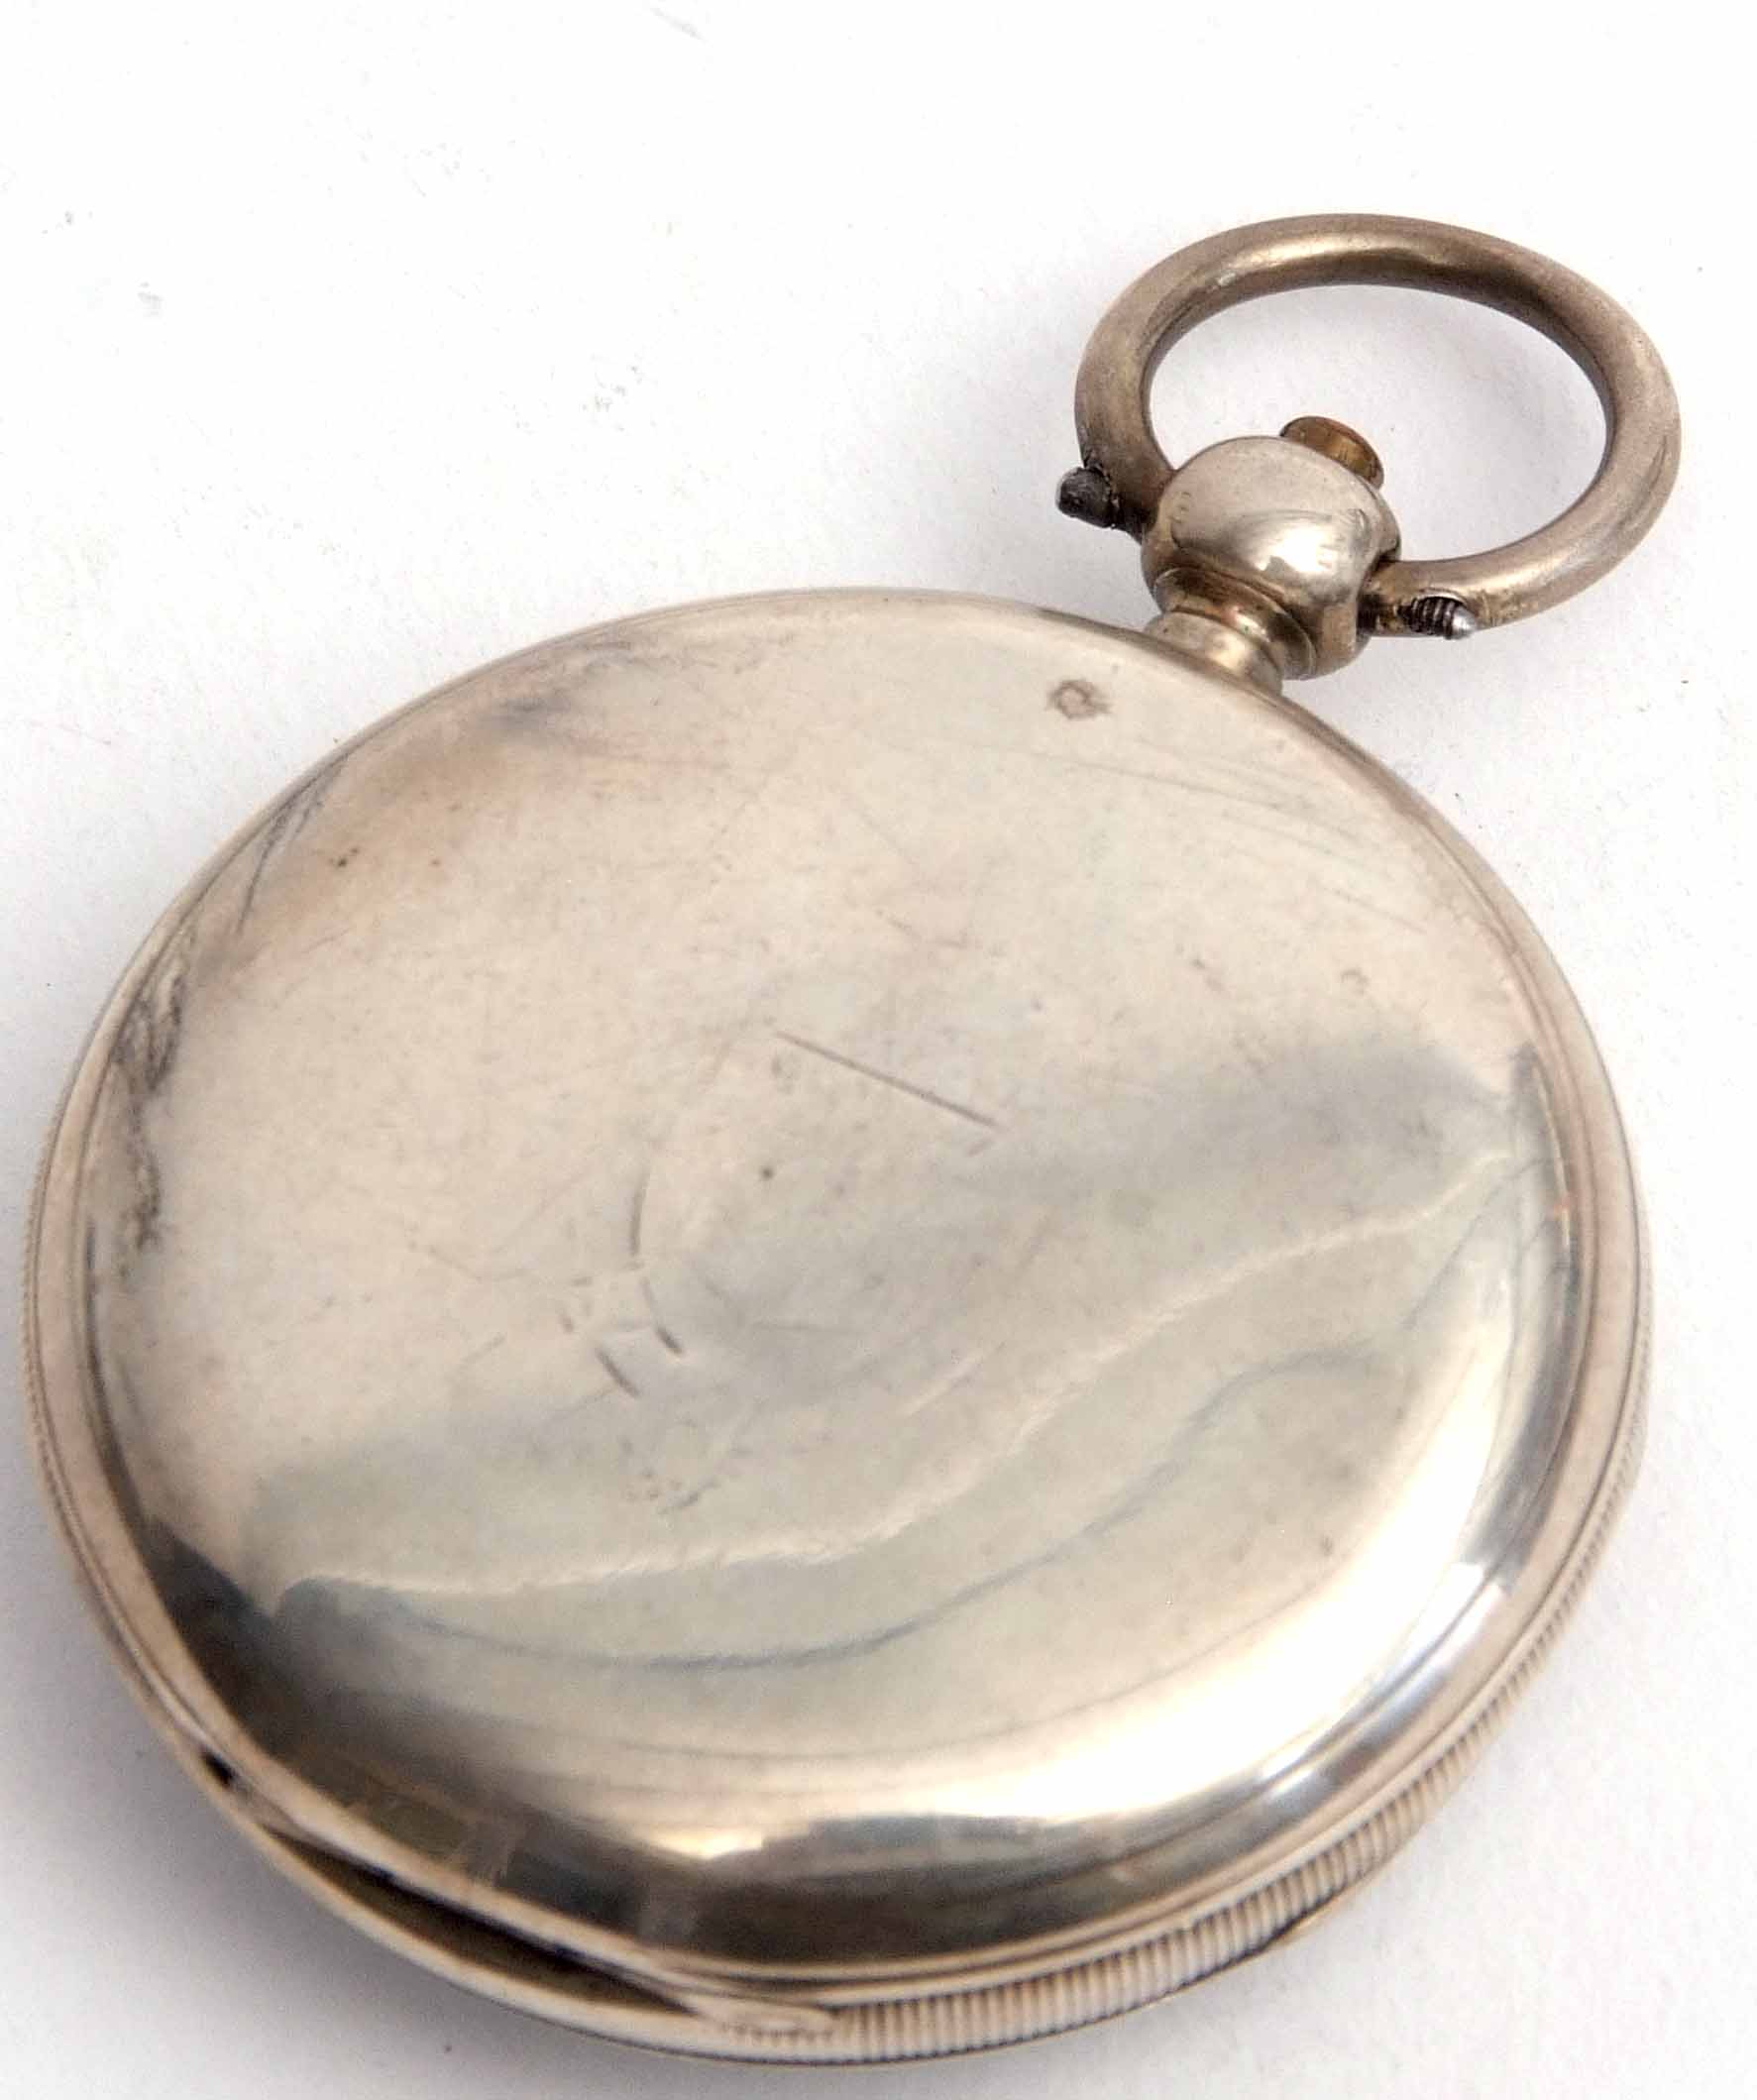 Third quarter of 19th century silver cased open face lever watch, Jas North - Ilford, 34033, the - Image 2 of 2